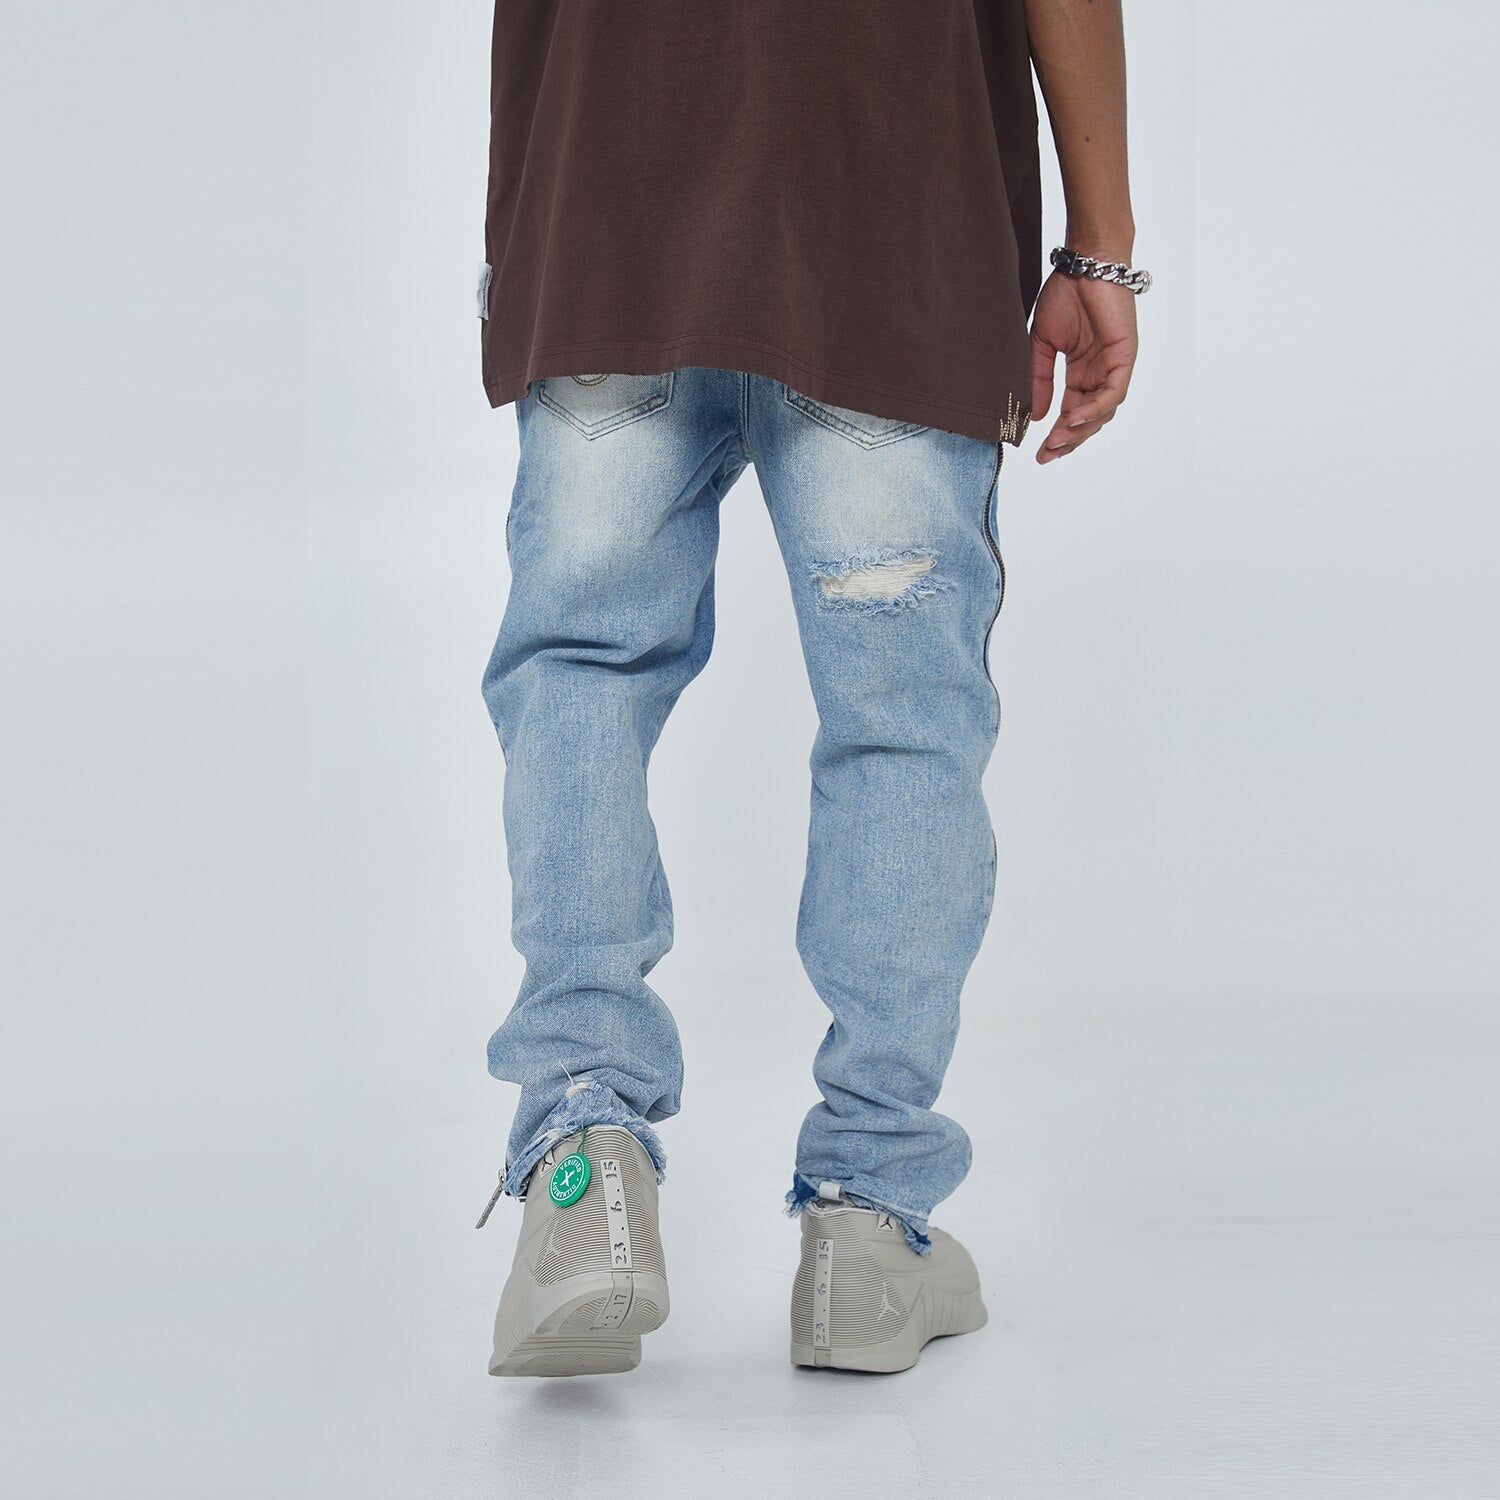 69 Distressed Ripped Jeans